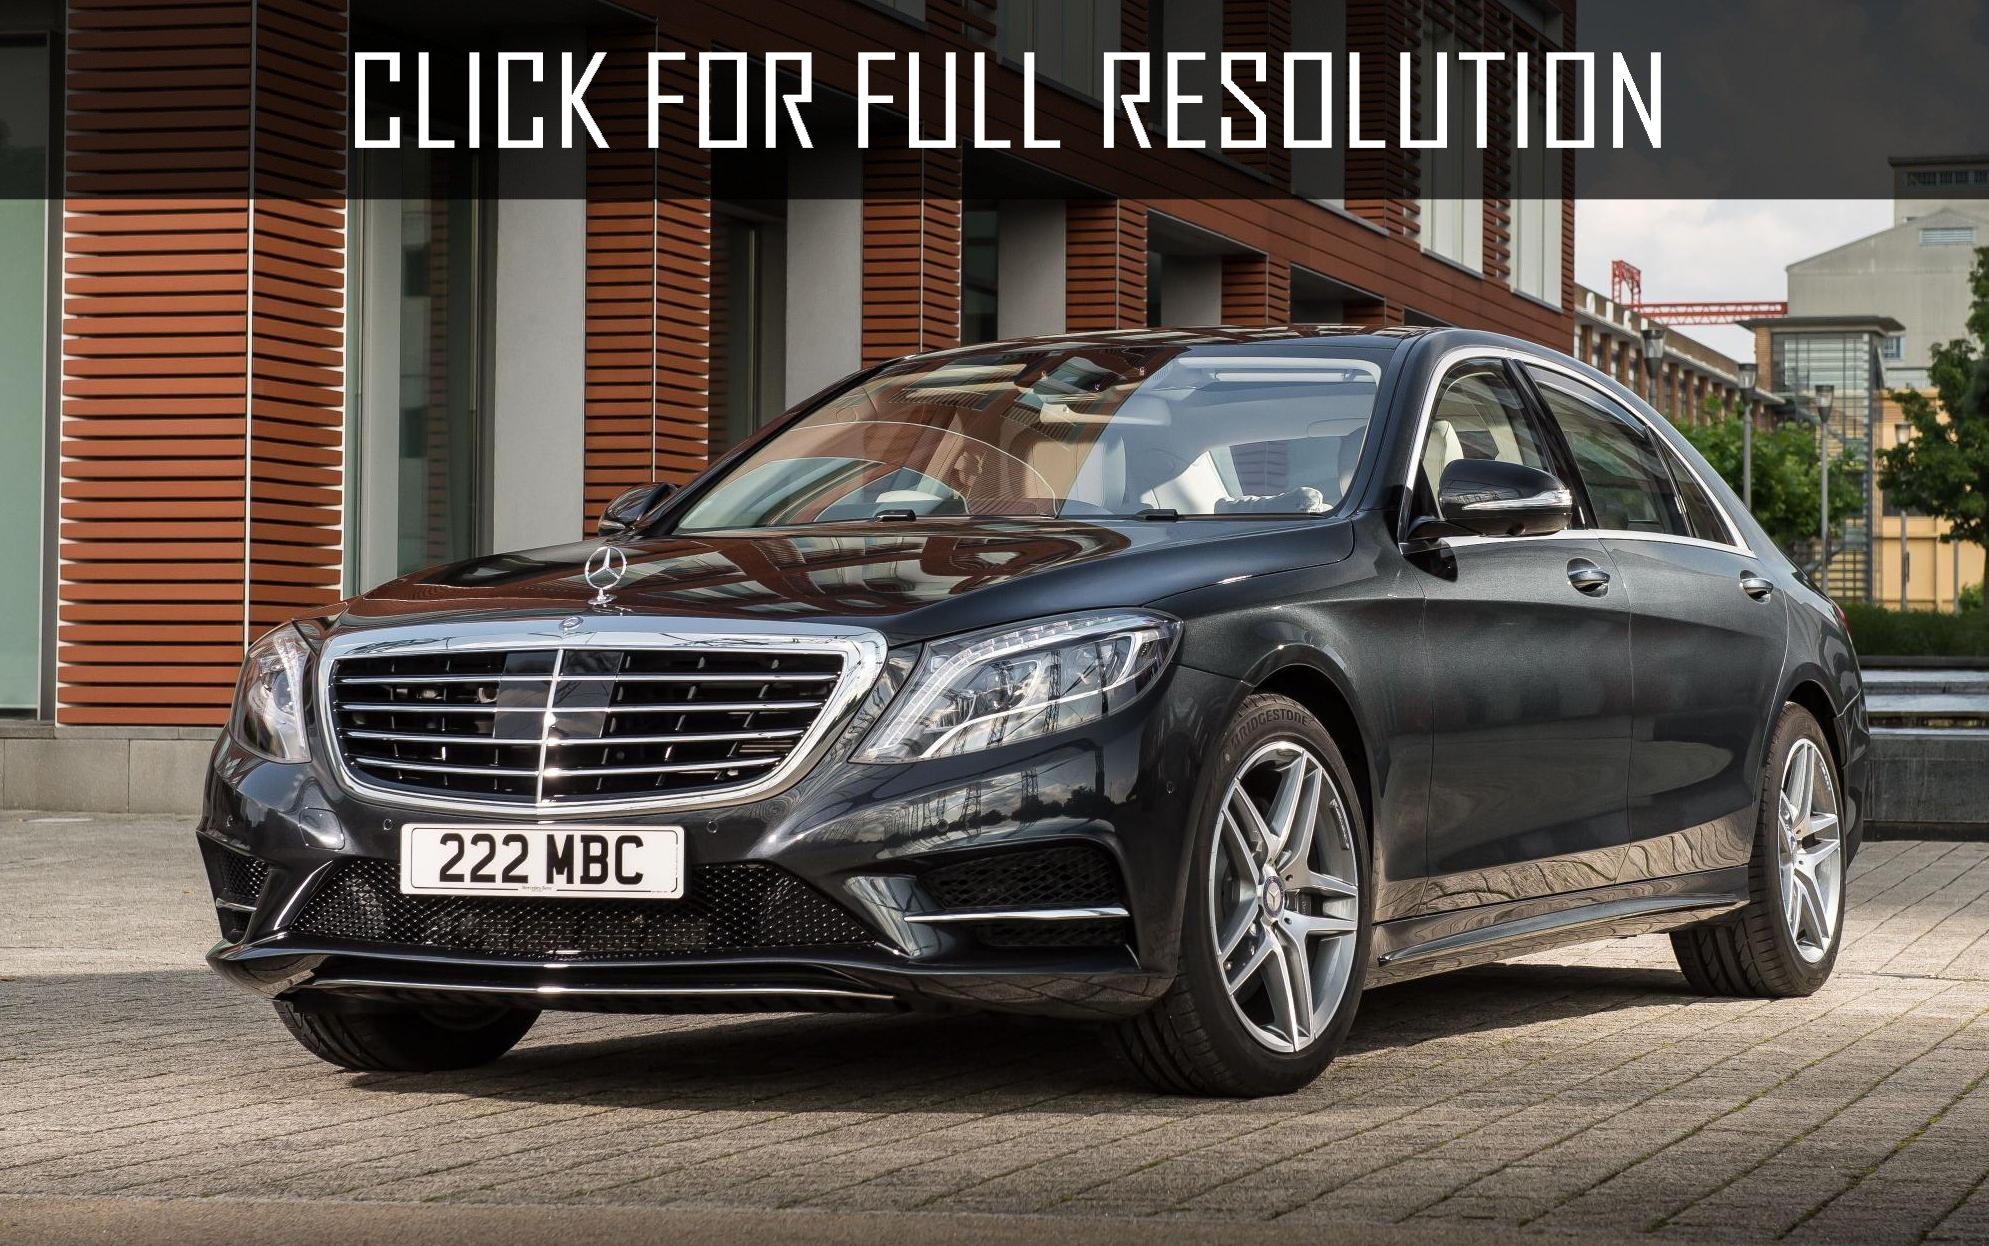 Mercedes Benz S Class 350 Cdi amazing photo gallery, some information